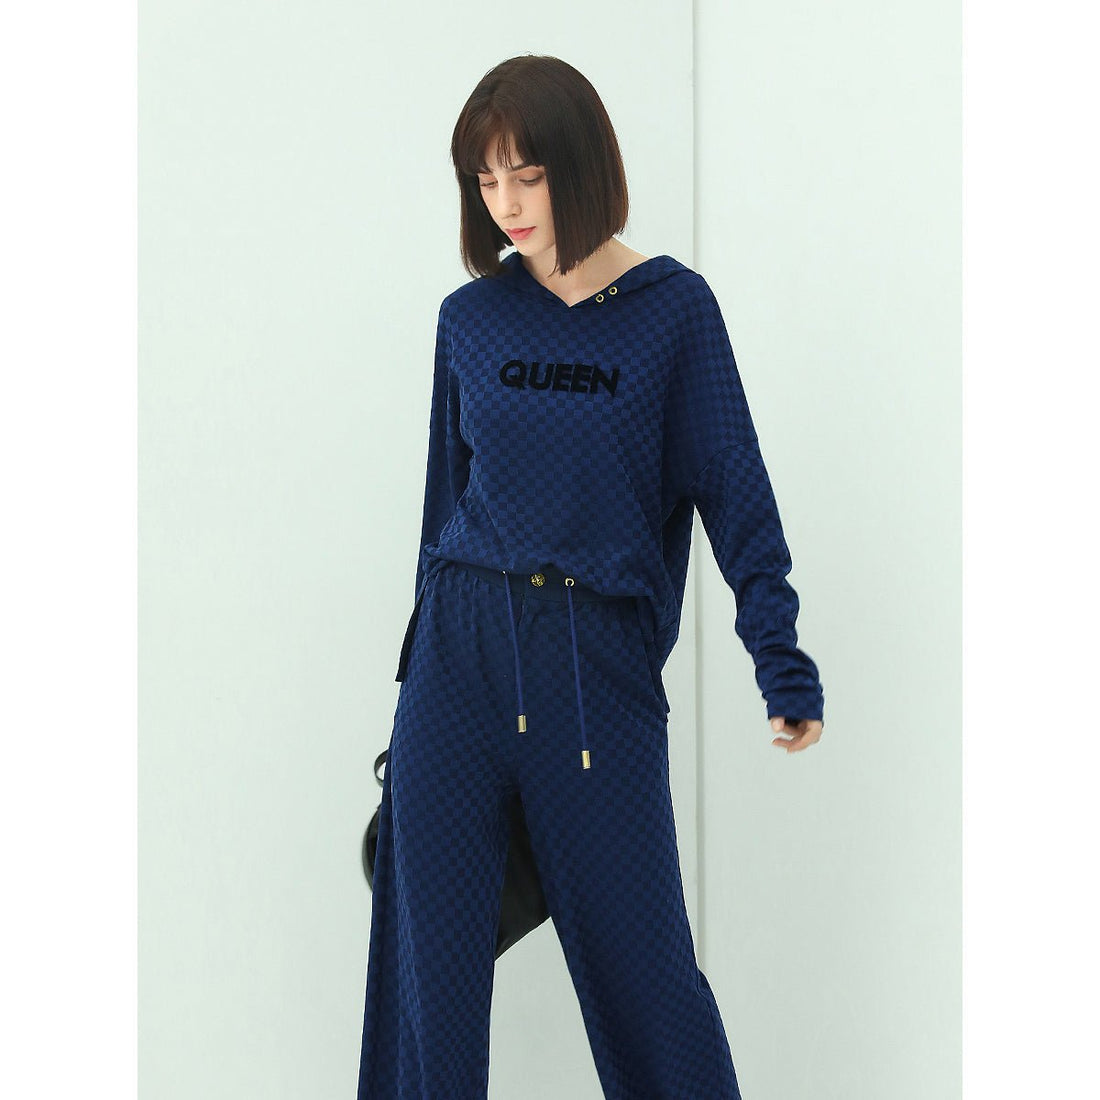 QUEEN Embroidery Blue Hooded Sweater - 0cm